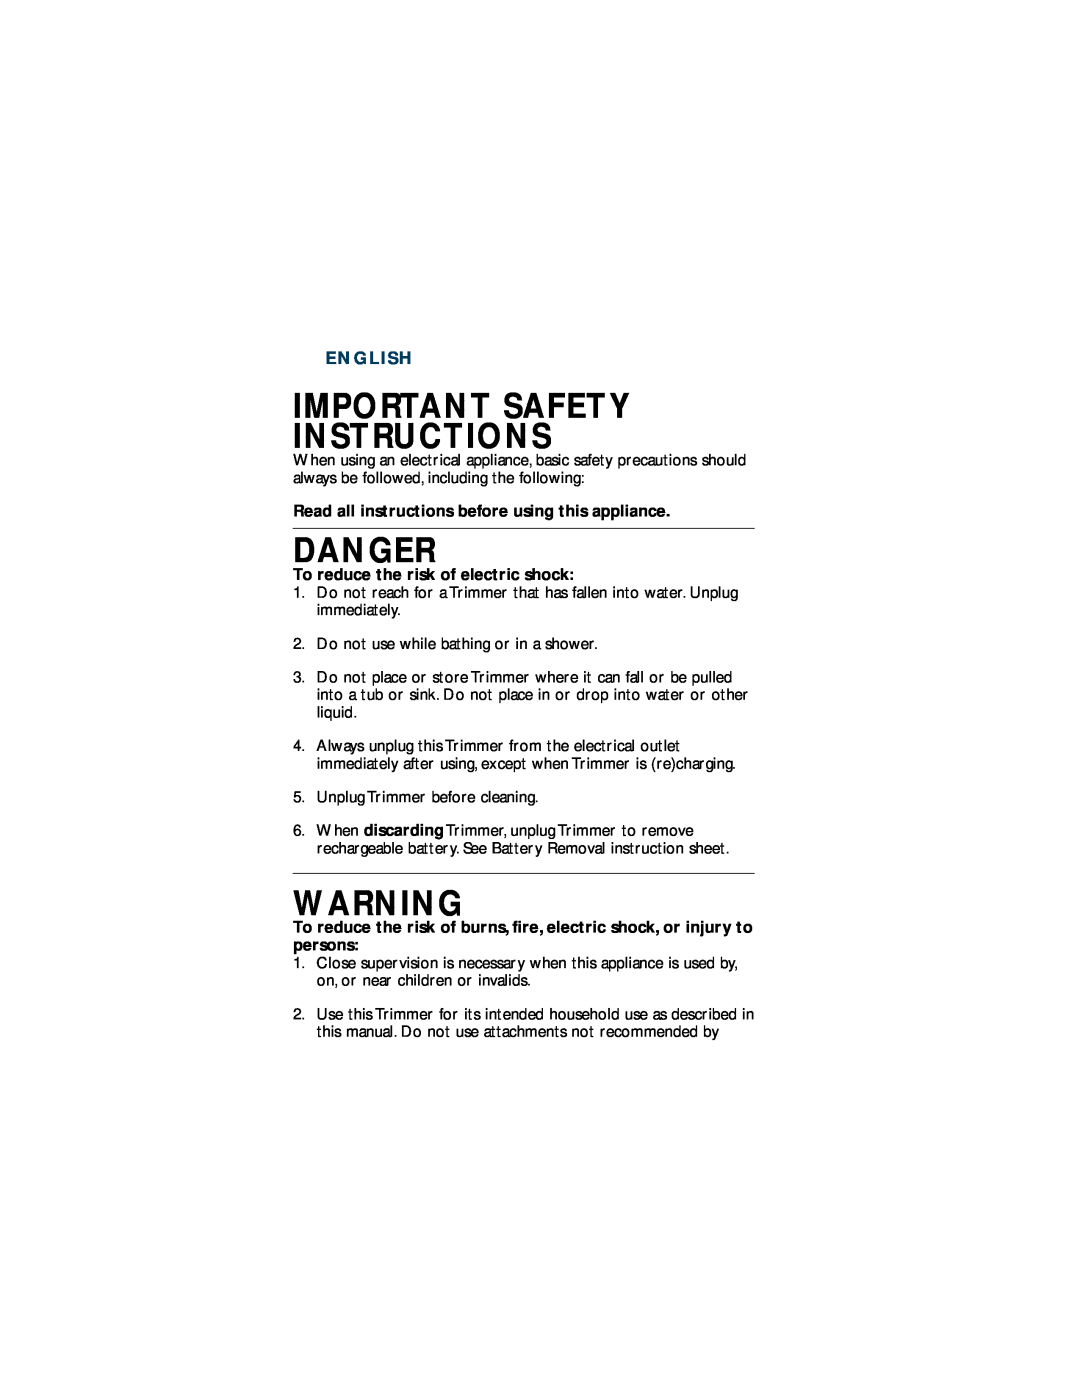 Philips T660 manual Important Safety Instructions, Danger, English, Read all instructions before using this appliance 